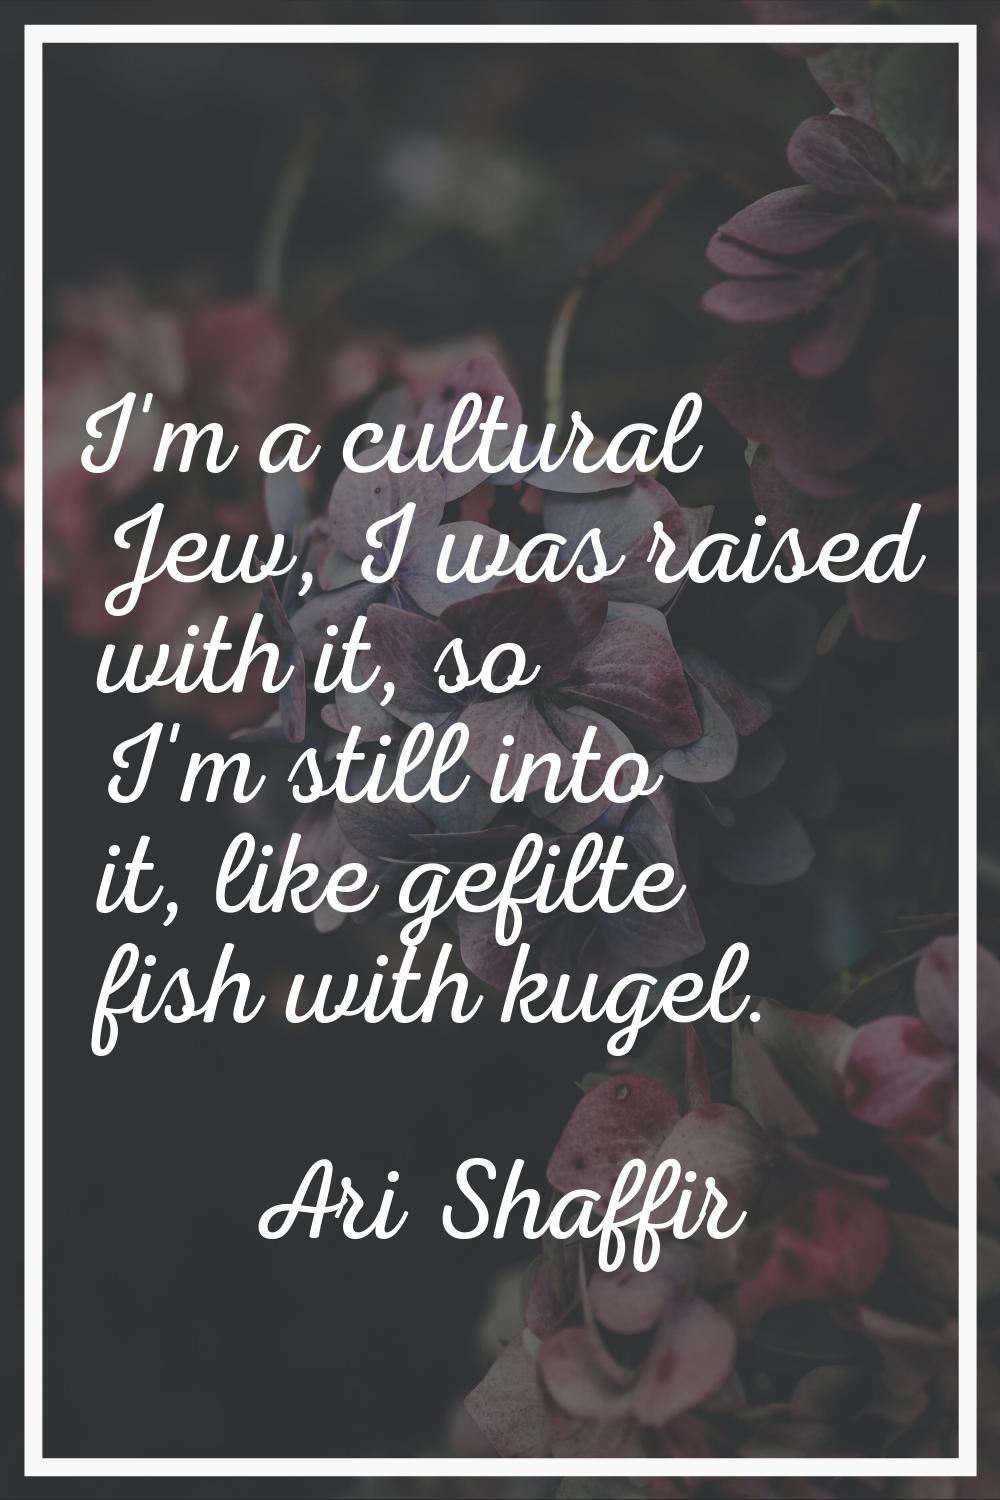 I'm a cultural Jew, I was raised with it, so I'm still into it, like gefilte fish with kugel.